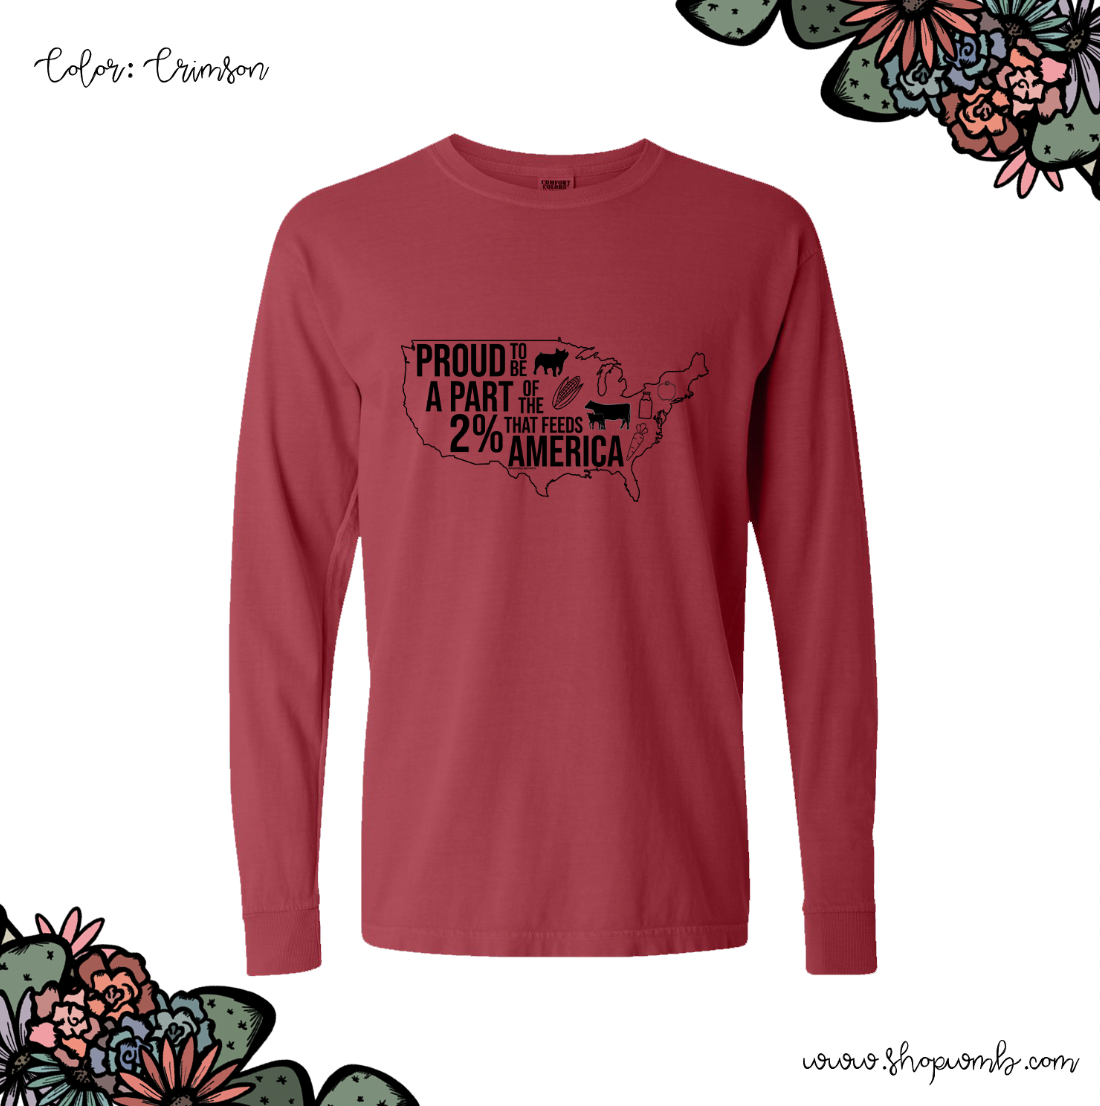 Proud To Support The 2% That Feeds America LONG SLEEVE T-Shirt (S-3XL) - Multiple Colors!